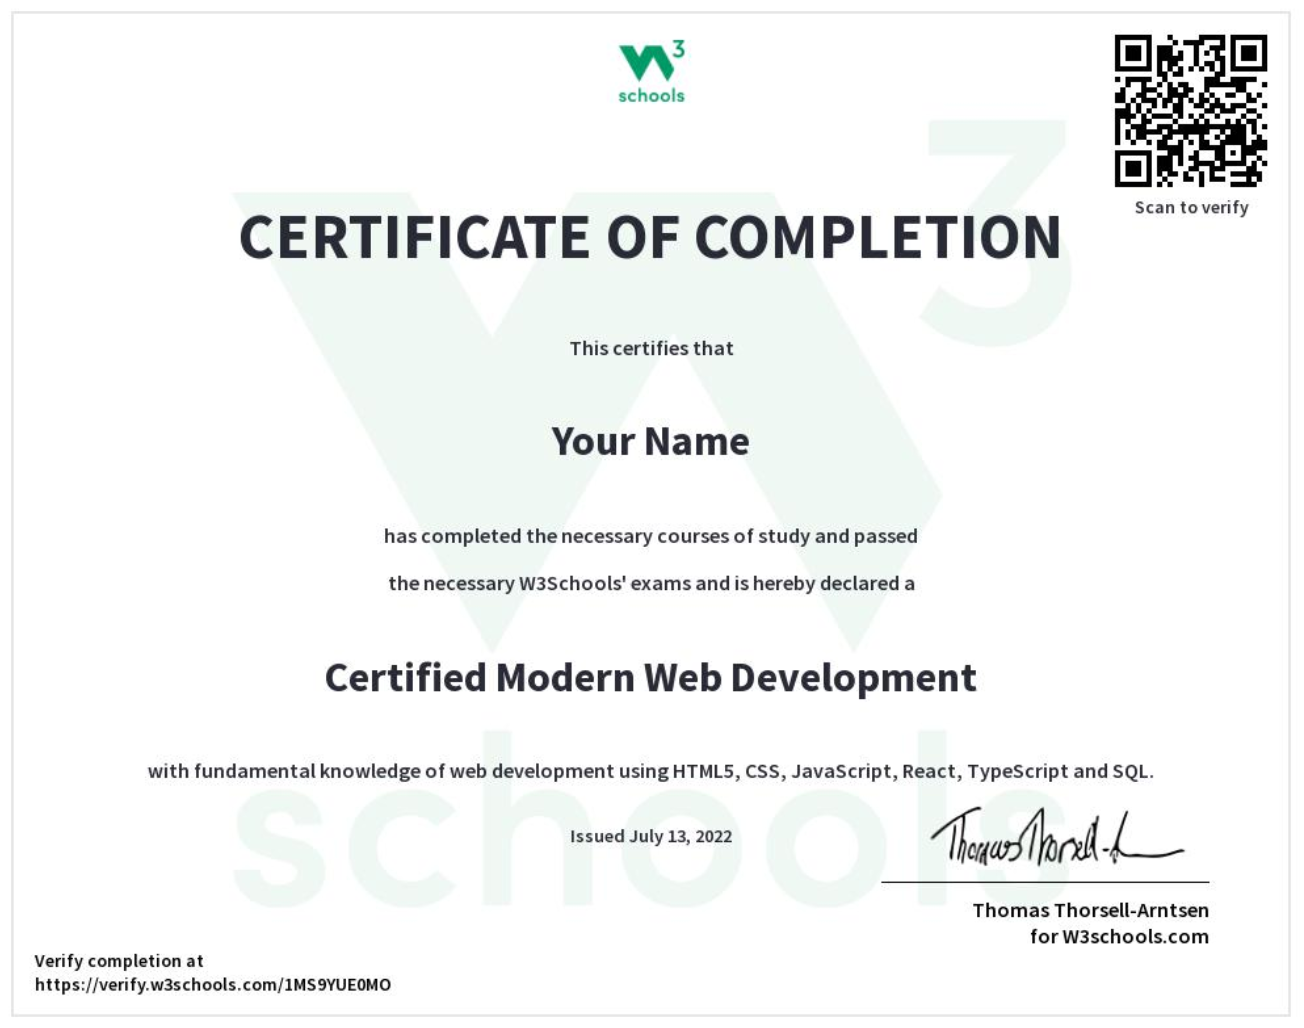 Why get a W3Schools Certificate?